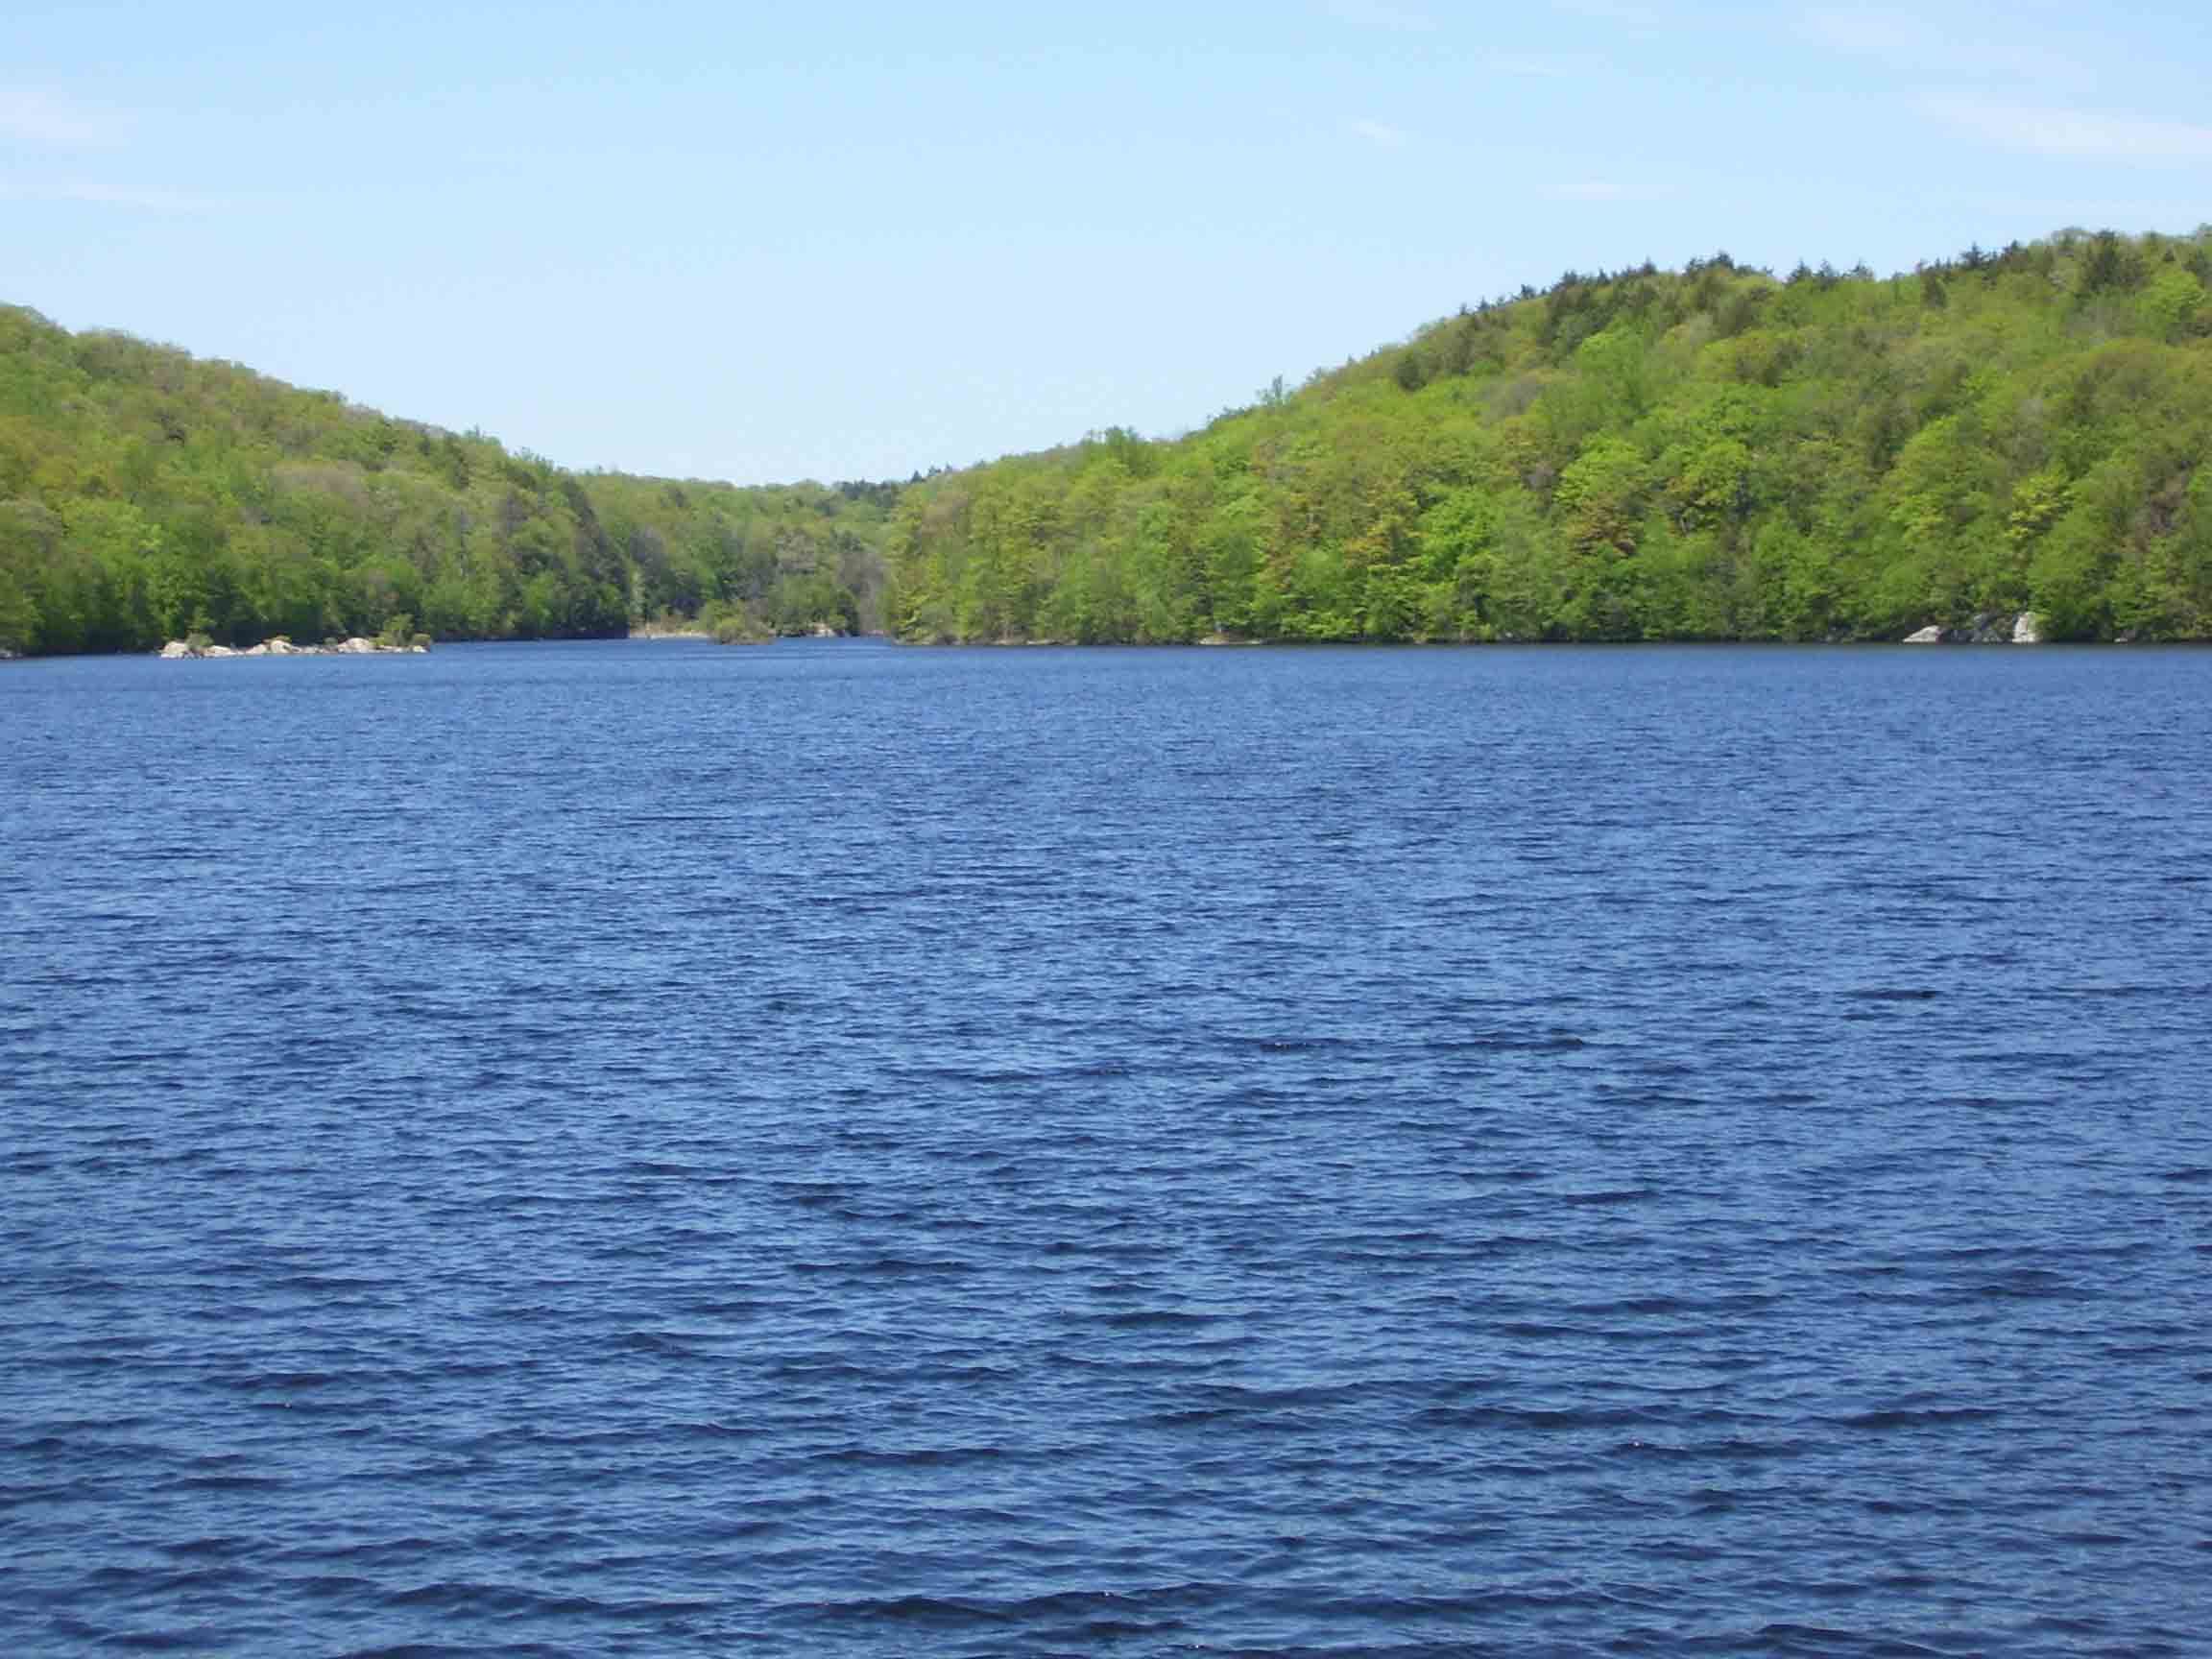 mm 0.0 - Another view of Canopus Lake. This one was taken in May from just across the road from the AT sign visible in previous picture. Courtesy dlcul@conncoll.edu